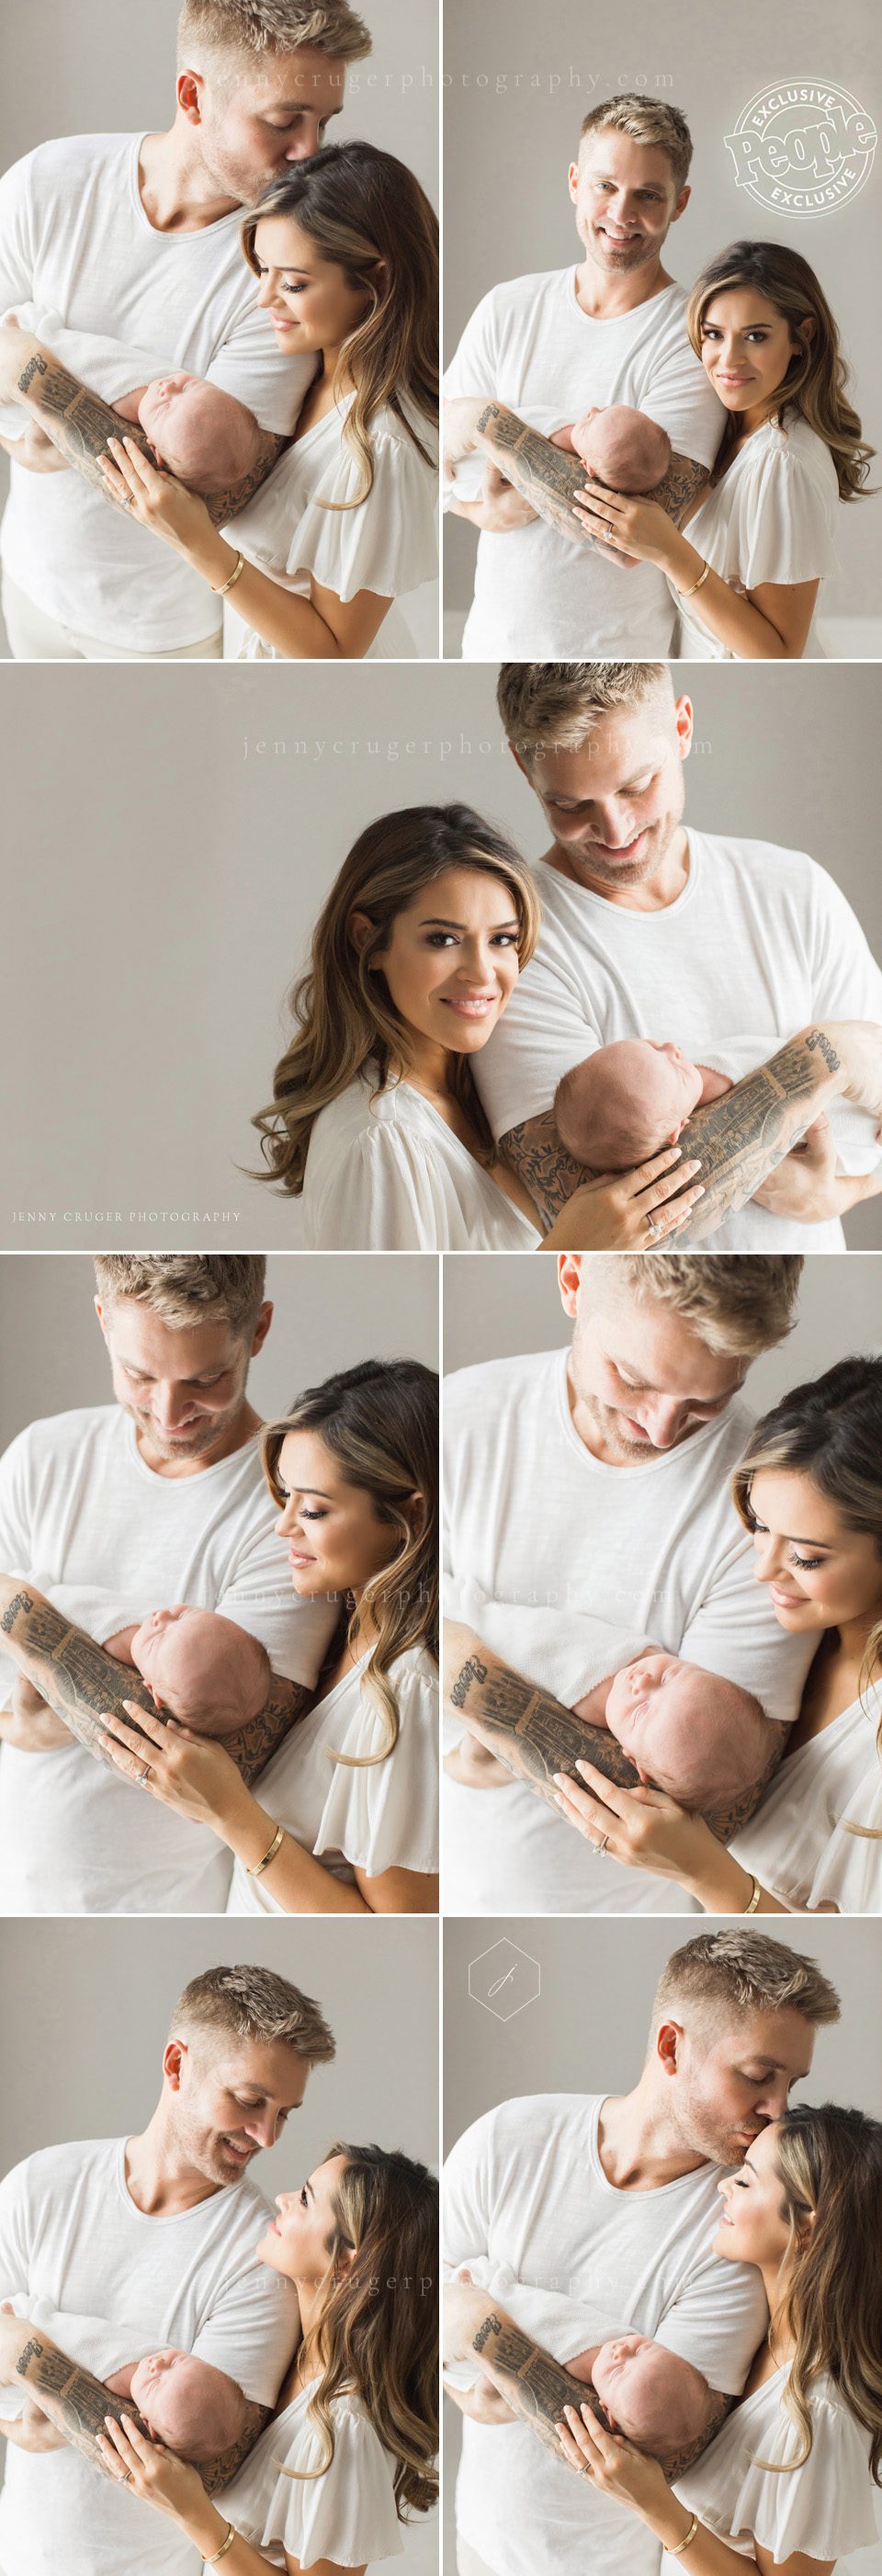 newborn photographer in nashville brett young newborn session  DO NOT USE WITHOUT PROPER CREDIT and PERMISSION